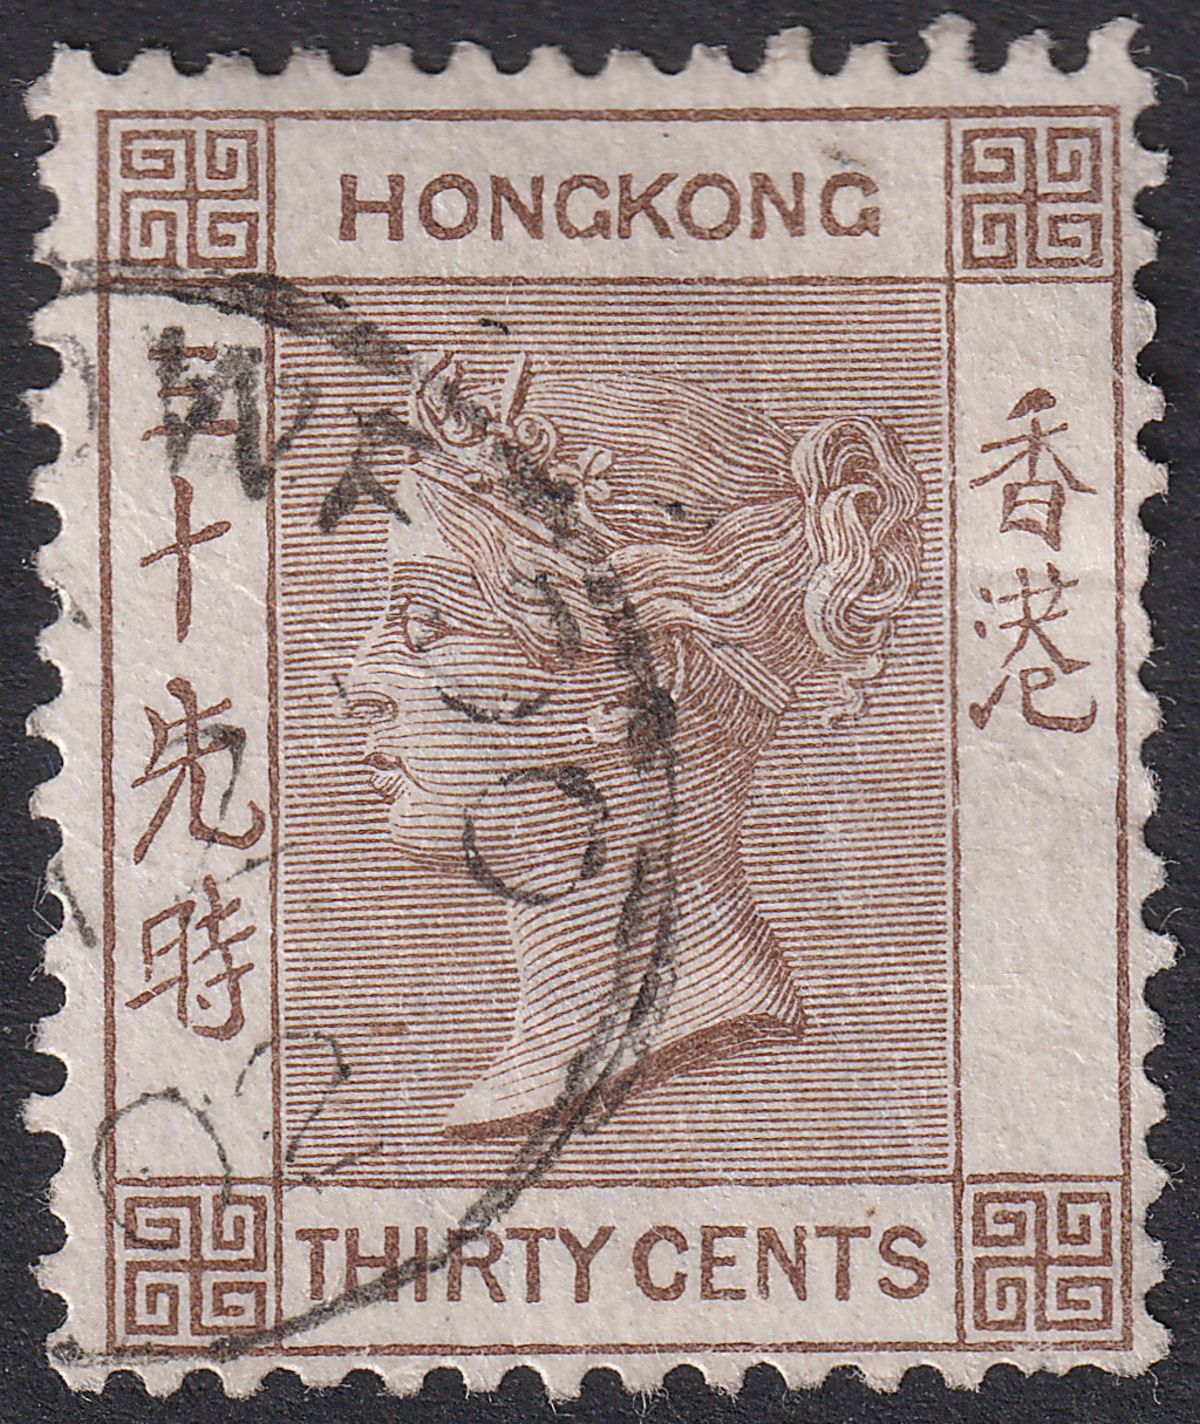 Hong Kong 1902 QV 30c Brown Used with FOOCHOW Postmarks SG Z360 cat £100